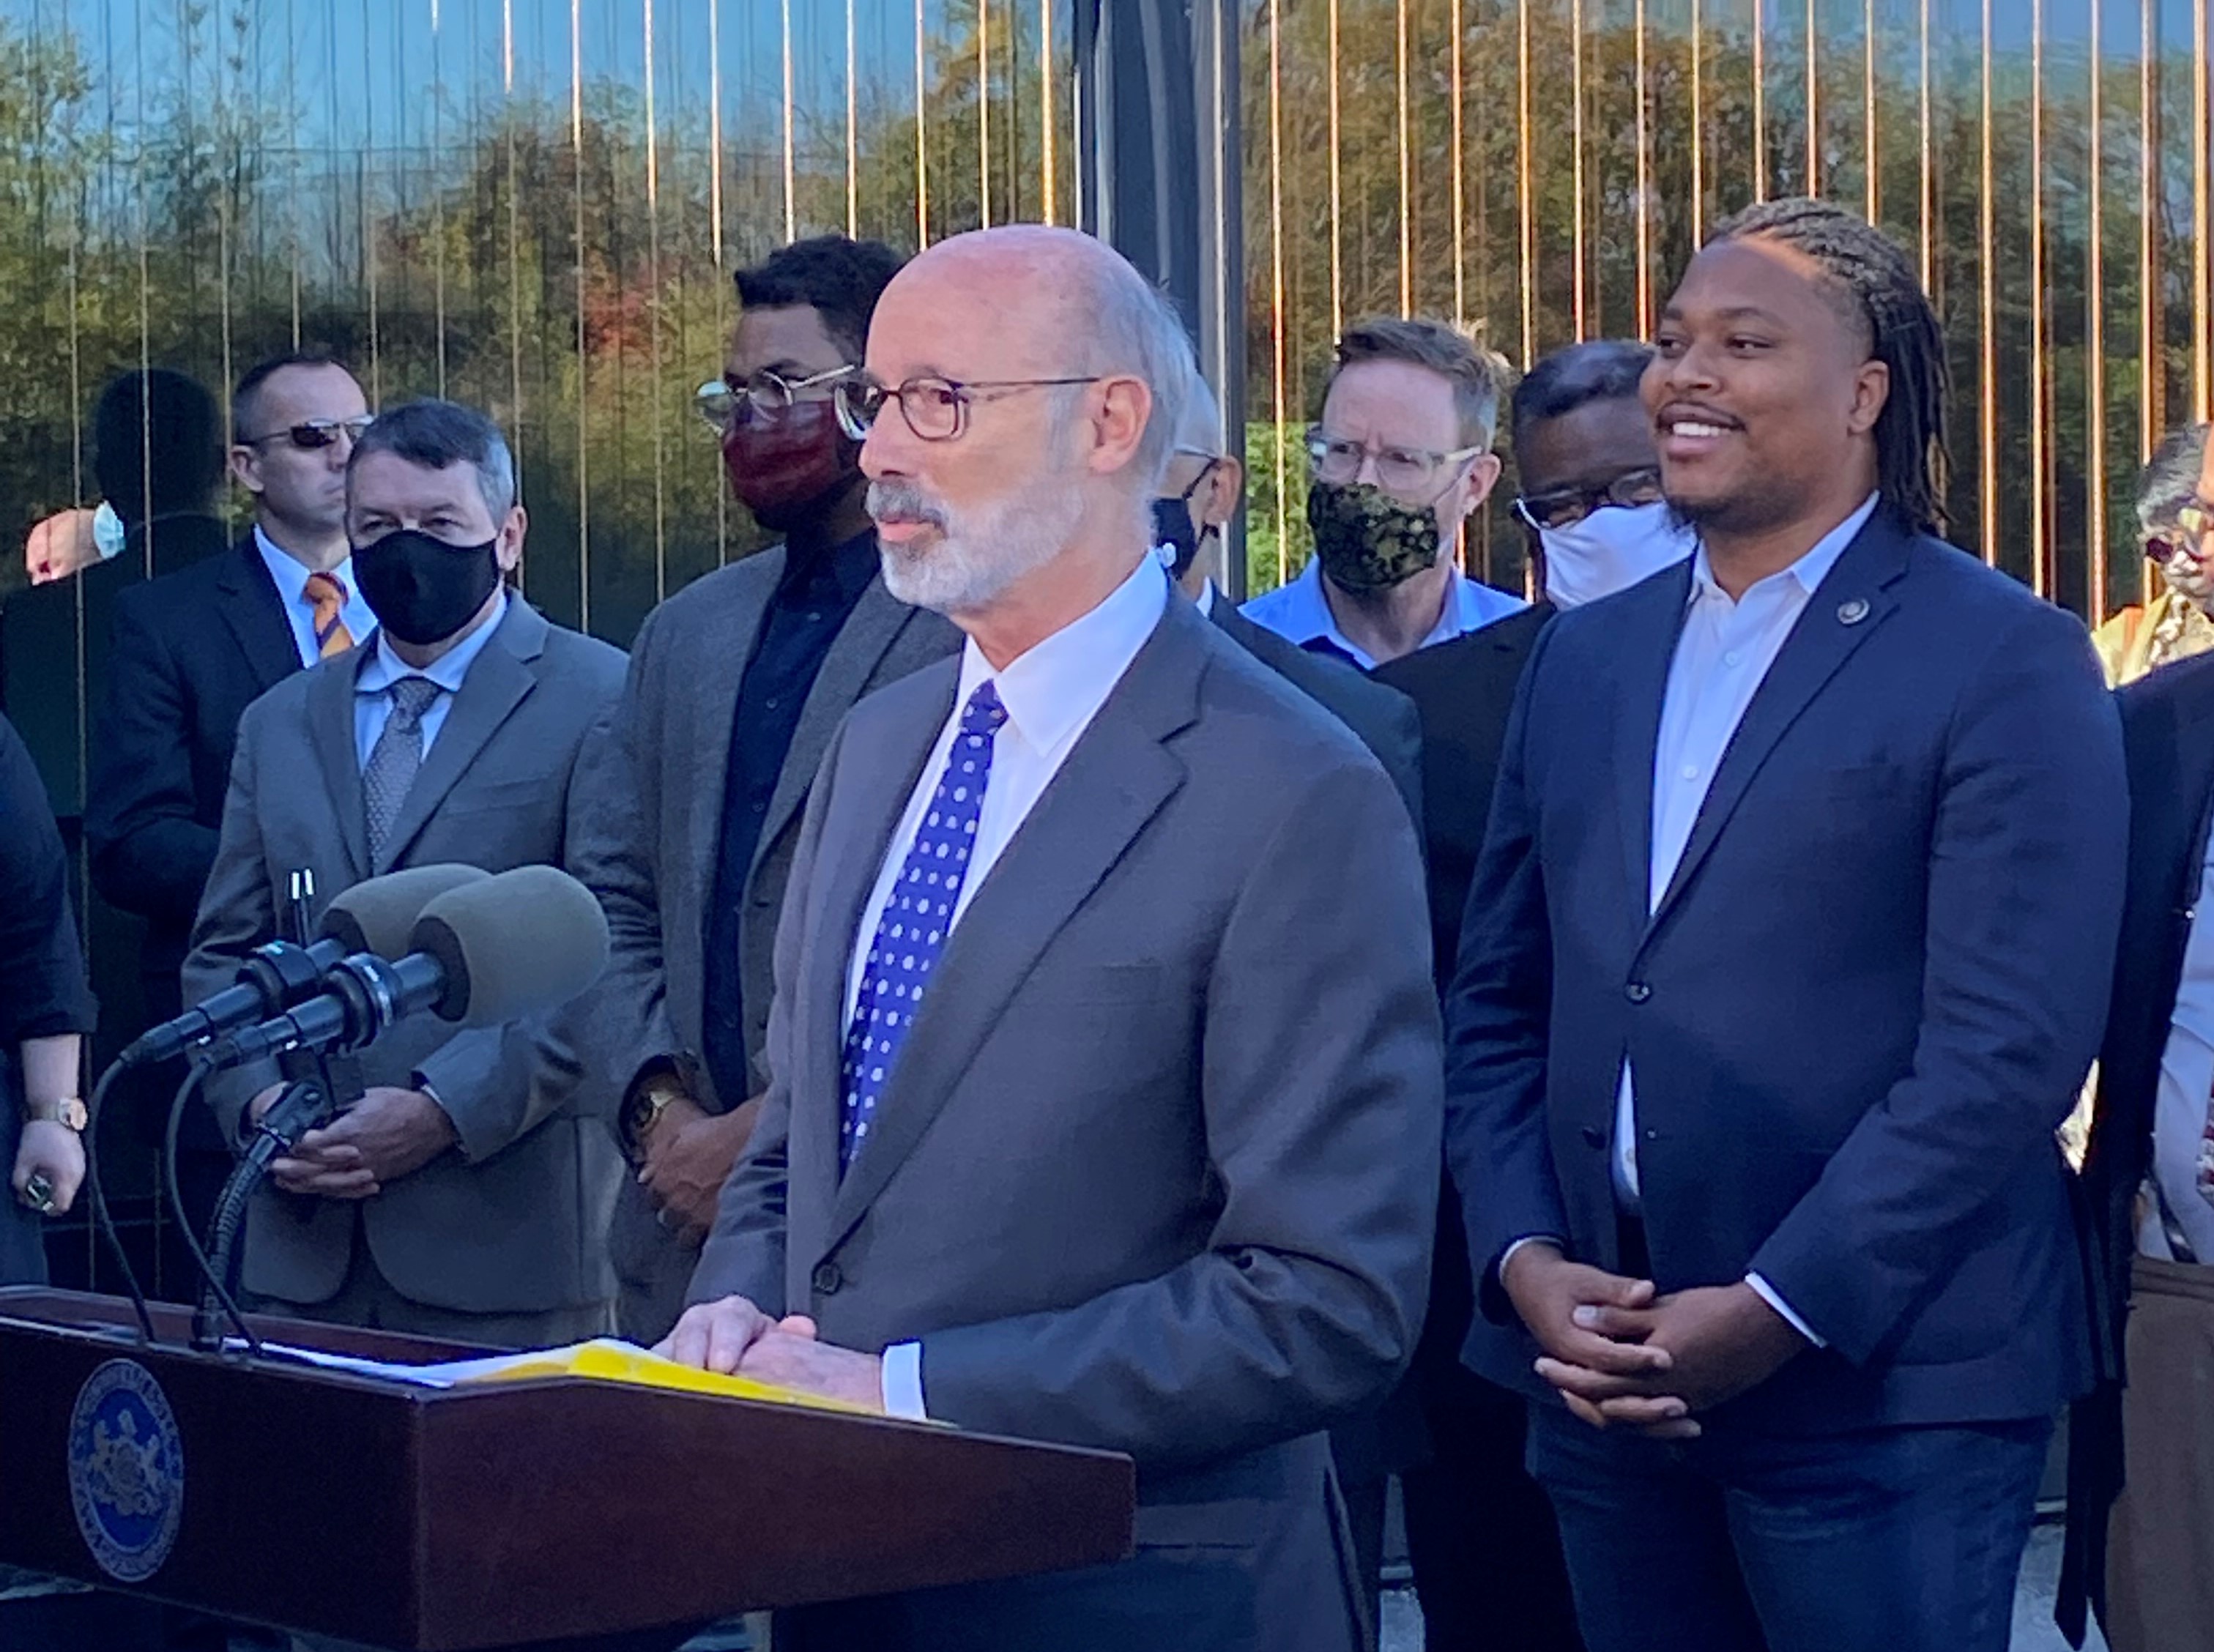 Pennsylvania Governor Tom Wolf at The Discovery Center